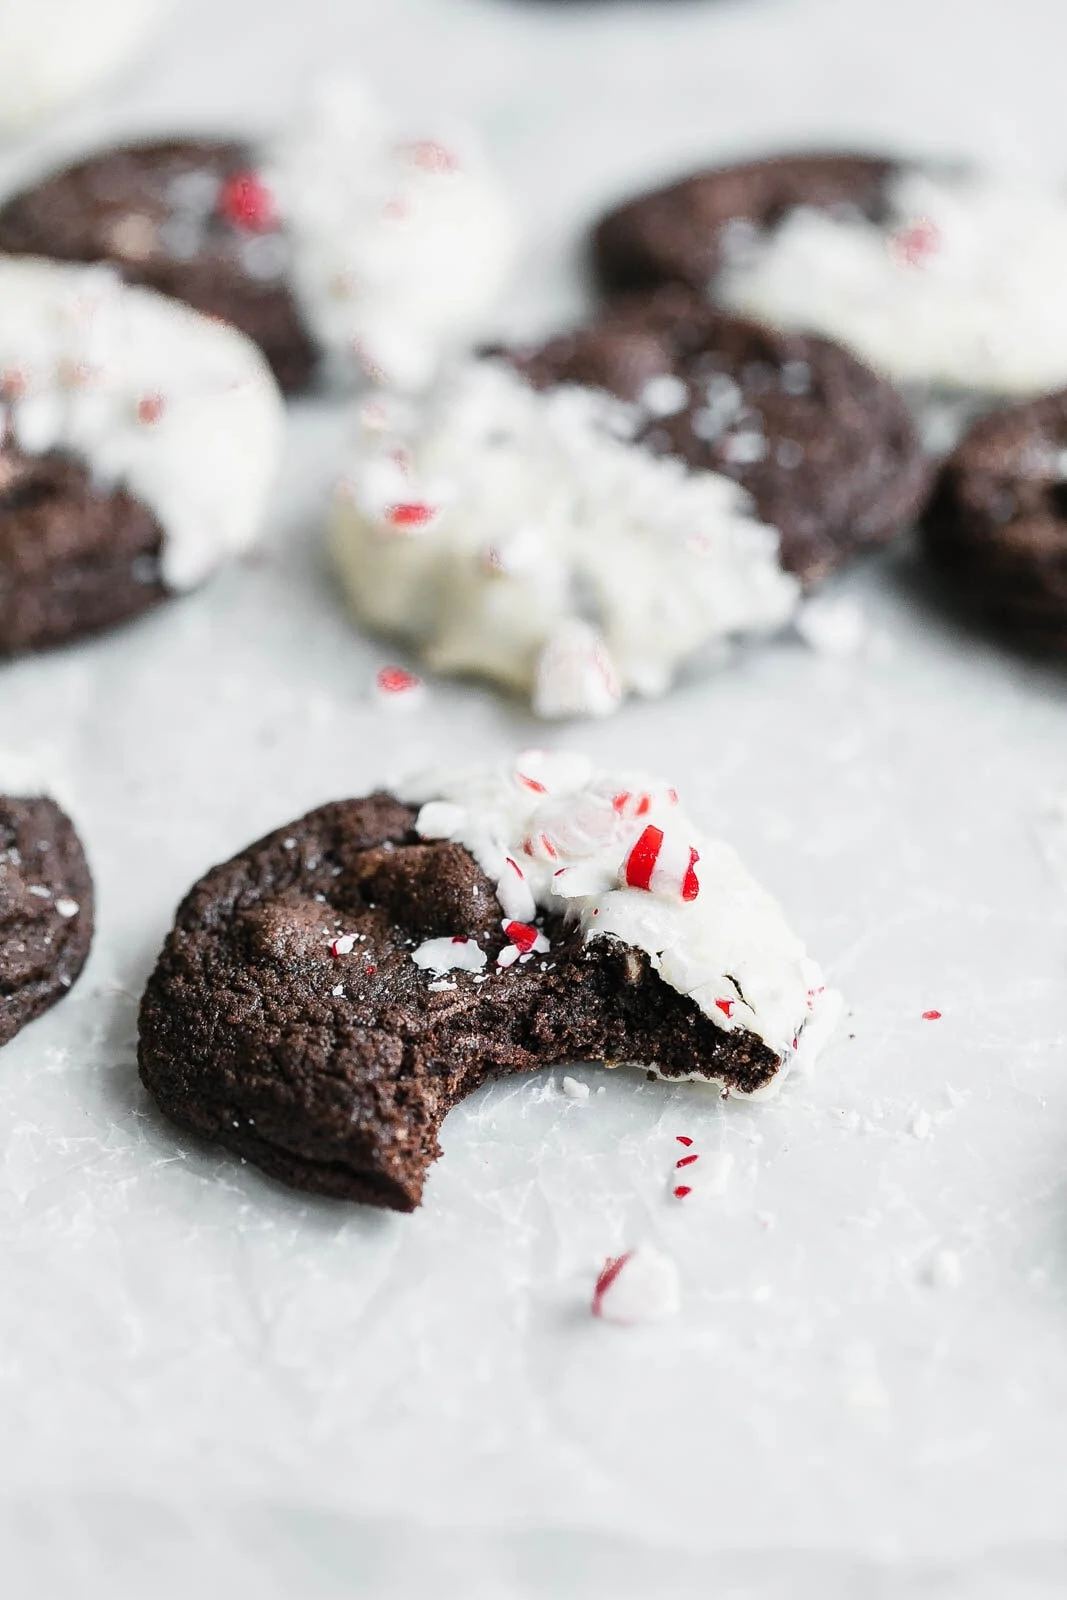 https://bromabakery.com/wp-content/uploads/2017/11/Chocolate-Peppermint-Cookies-12-1067x1600.webp